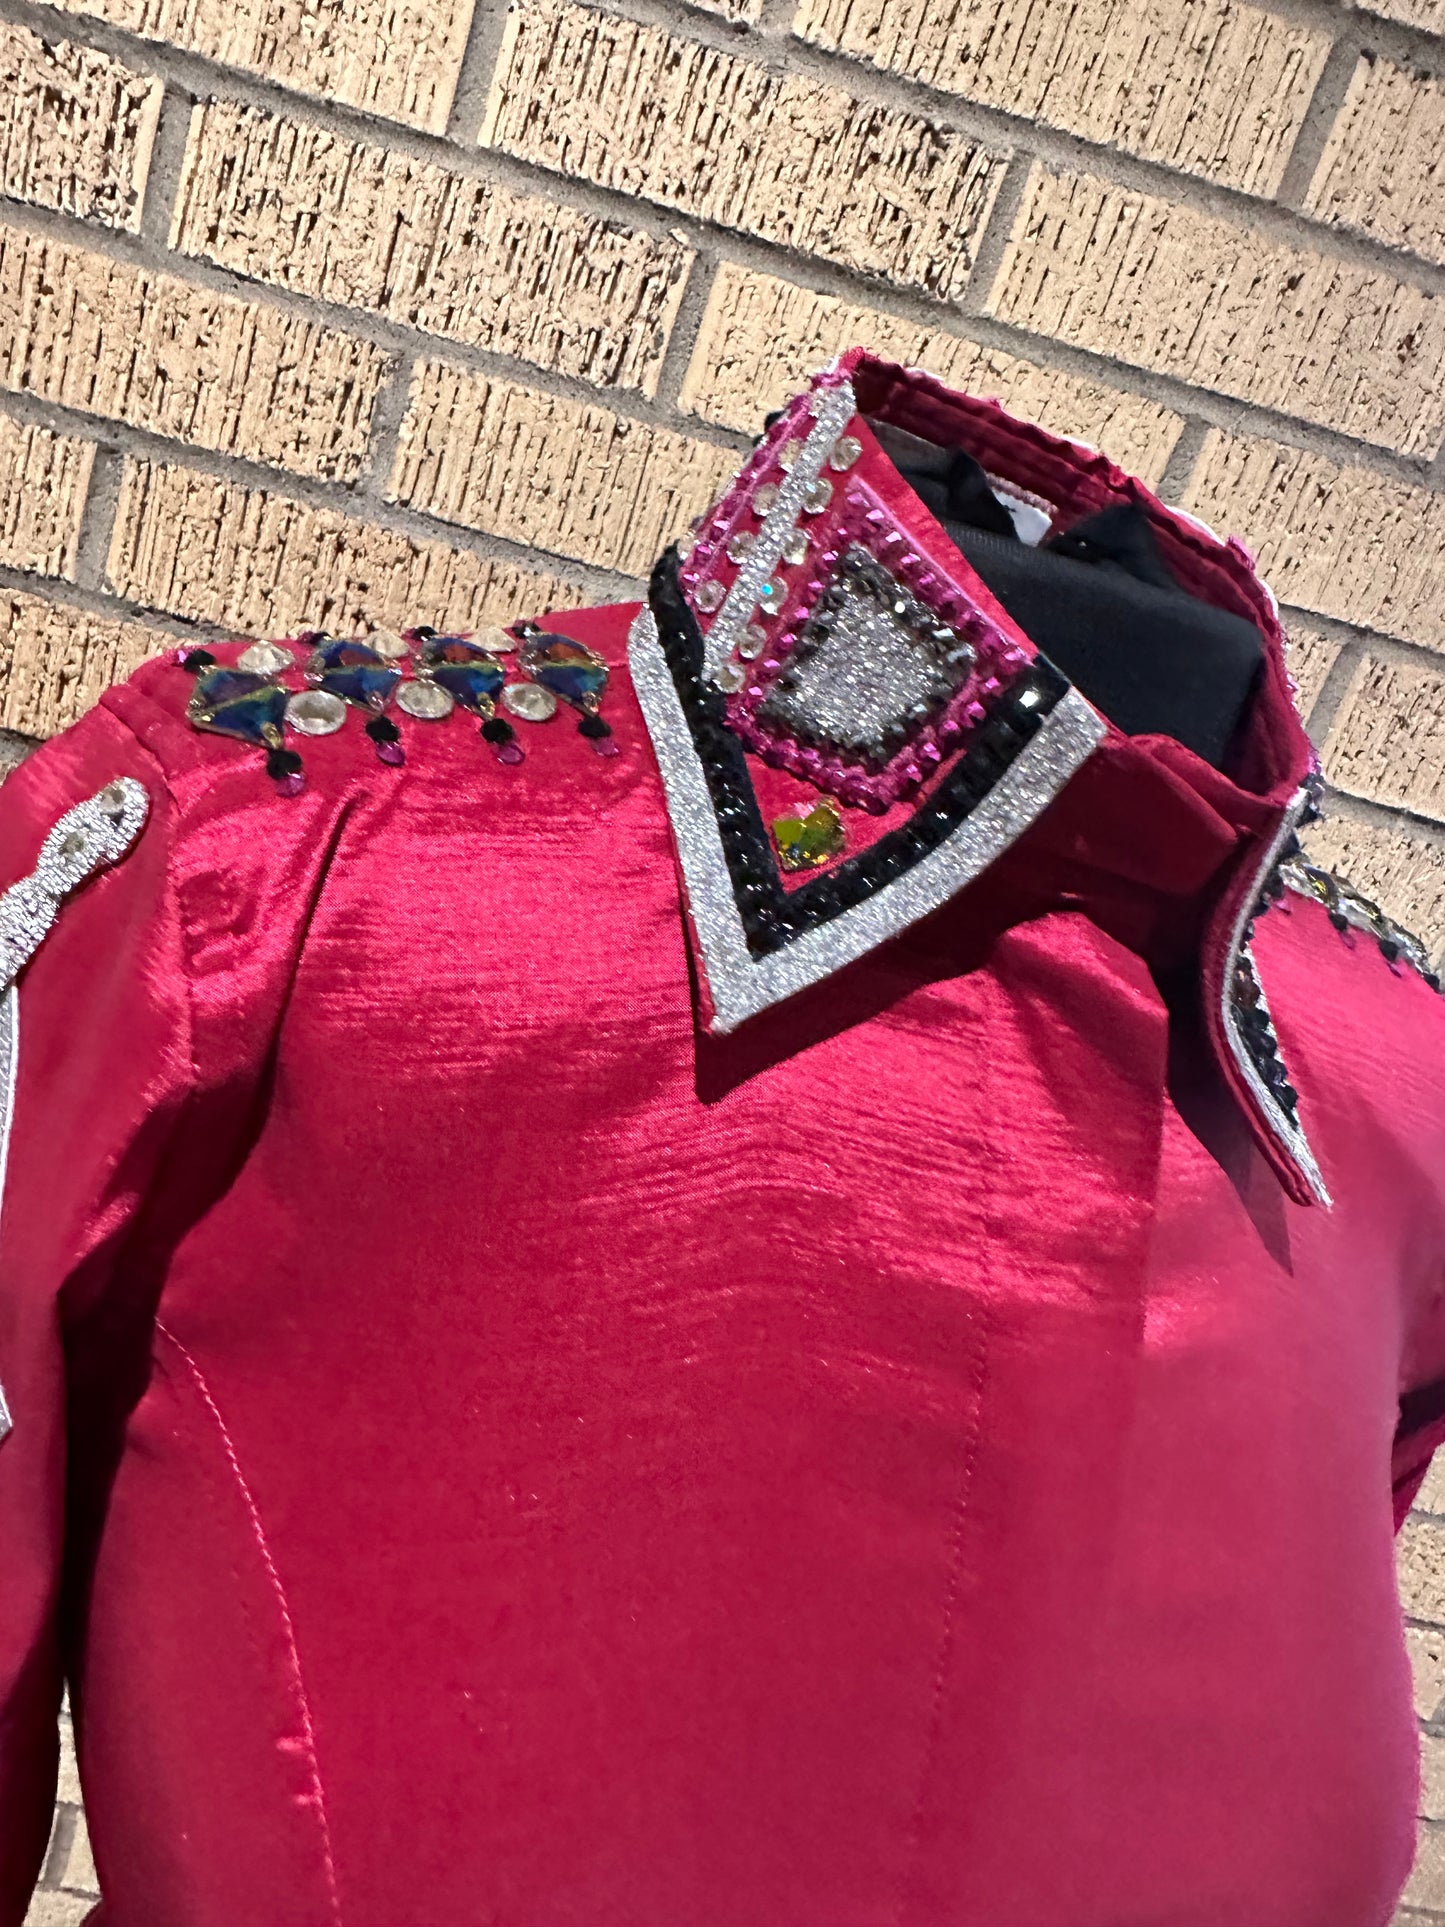 Extra Small day shirt. Stretch taffeta hidden zipper cranberry with tons of bling